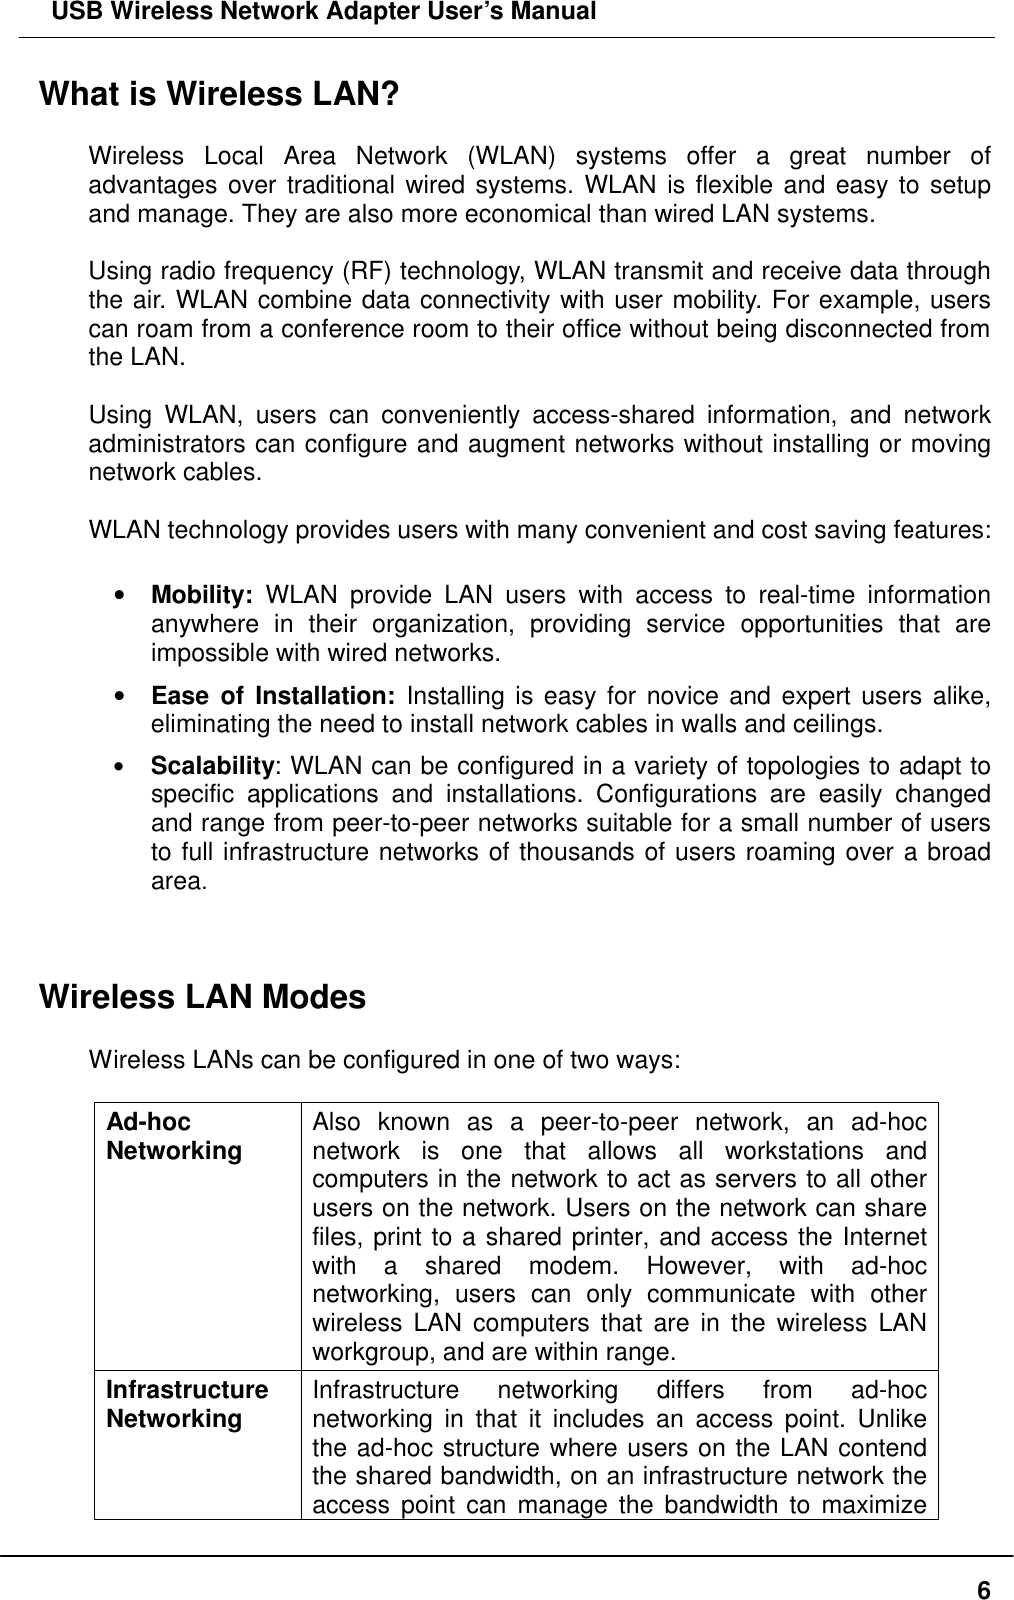  USB Wireless Network Adapter User’s Manual  6What is Wireless LAN?  Wireless Local Area Network (WLAN) systems offer a great number of advantages over traditional wired systems. WLAN is flexible and easy to setup and manage. They are also more economical than wired LAN systems.  Using radio frequency (RF) technology, WLAN transmit and receive data through the air. WLAN combine data connectivity with user mobility. For example, users can roam from a conference room to their office without being disconnected from the LAN.  Using WLAN, users can conveniently access-shared information, and network administrators can configure and augment networks without installing or moving network cables.  WLAN technology provides users with many convenient and cost saving features:  •  Mobility: WLAN provide LAN users with access to real-time information anywhere in their organization, providing service opportunities that are impossible with wired networks. •  Ease of Installation: Installing is easy for novice and expert users alike, eliminating the need to install network cables in walls and ceilings.   • Scalability: WLAN can be configured in a variety of topologies to adapt to specific applications and installations. Configurations are easily changed and range from peer-to-peer networks suitable for a small number of users to full infrastructure networks of thousands of users roaming over a broad area.   Wireless LAN Modes  Wireless LANs can be configured in one of two ways:  Ad-hoc   Networking Also known as a peer-to-peer network, an ad-hoc network is one that allows all workstations and computers in the network to act as servers to all other users on the network. Users on the network can share files, print to a shared printer, and access the Internet with a shared modem. However, with ad-hoc networking, users can only communicate with other wireless LAN computers that are in the wireless LAN workgroup, and are within range. Infrastructure Networking Infrastructure networking differs from ad-hoc networking in that it includes an access point. Unlike the ad-hoc structure where users on the LAN contend the shared bandwidth, on an infrastructure network the access point can manage the bandwidth to maximize 